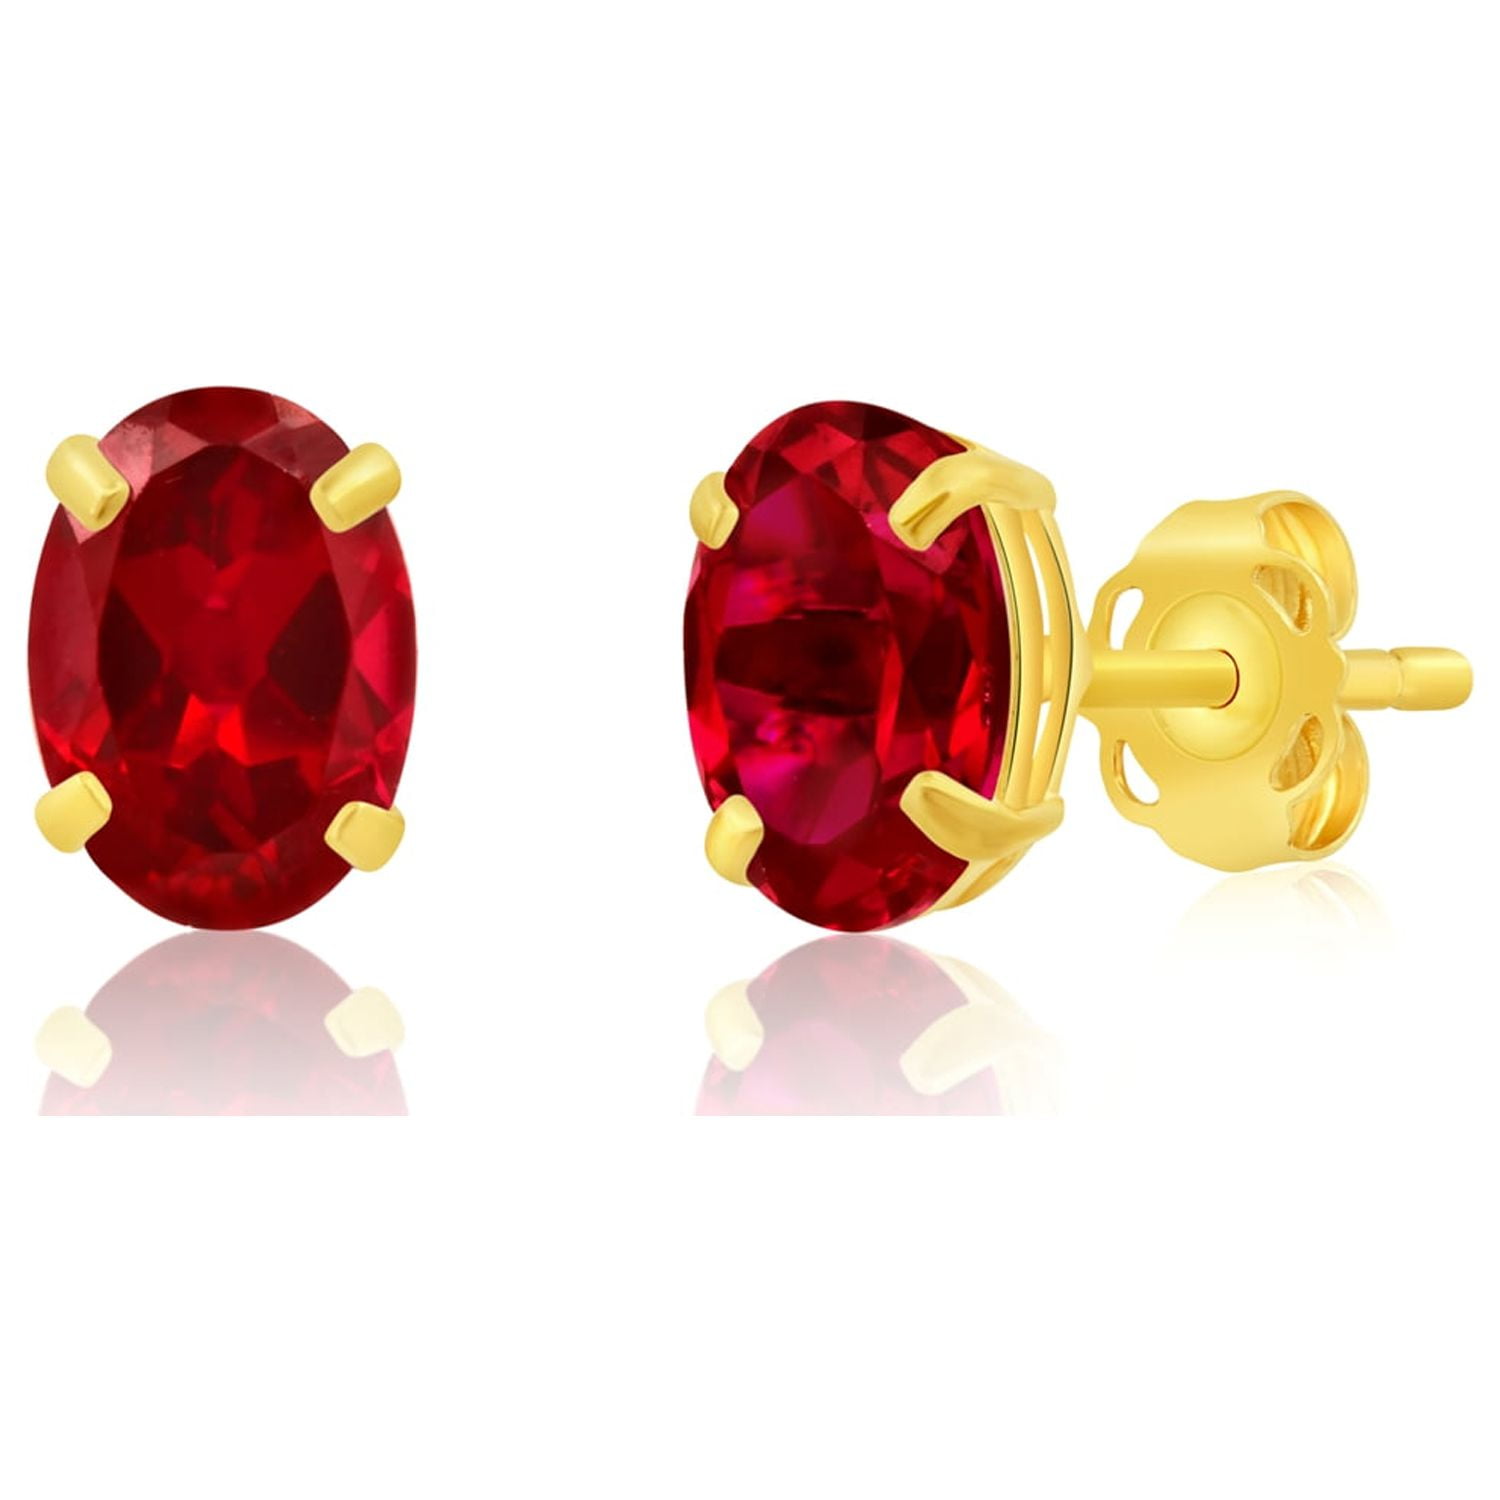 12-10 Carat Total Weight Ruby Stud Earrings 3 Prong India | Ubuy